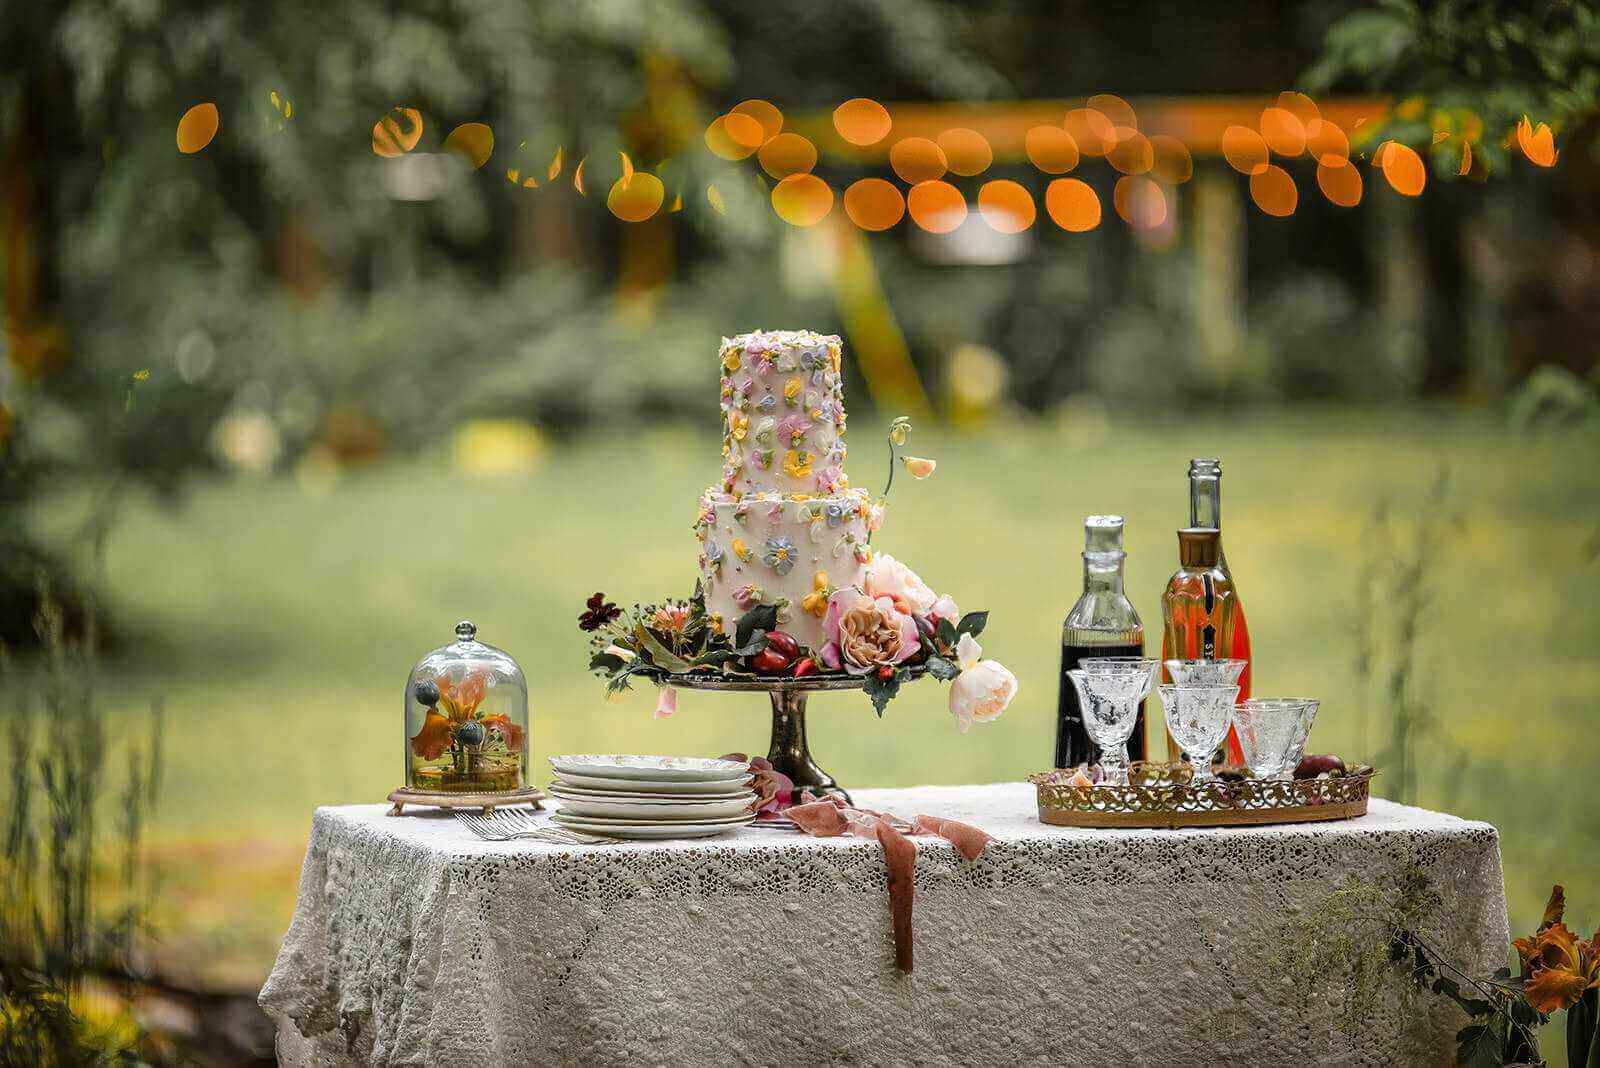 Vintage silver cake stand on an heirloom crochet tablecloth set up with a wedding cake, serving plates, clear glassware and drinks bottles